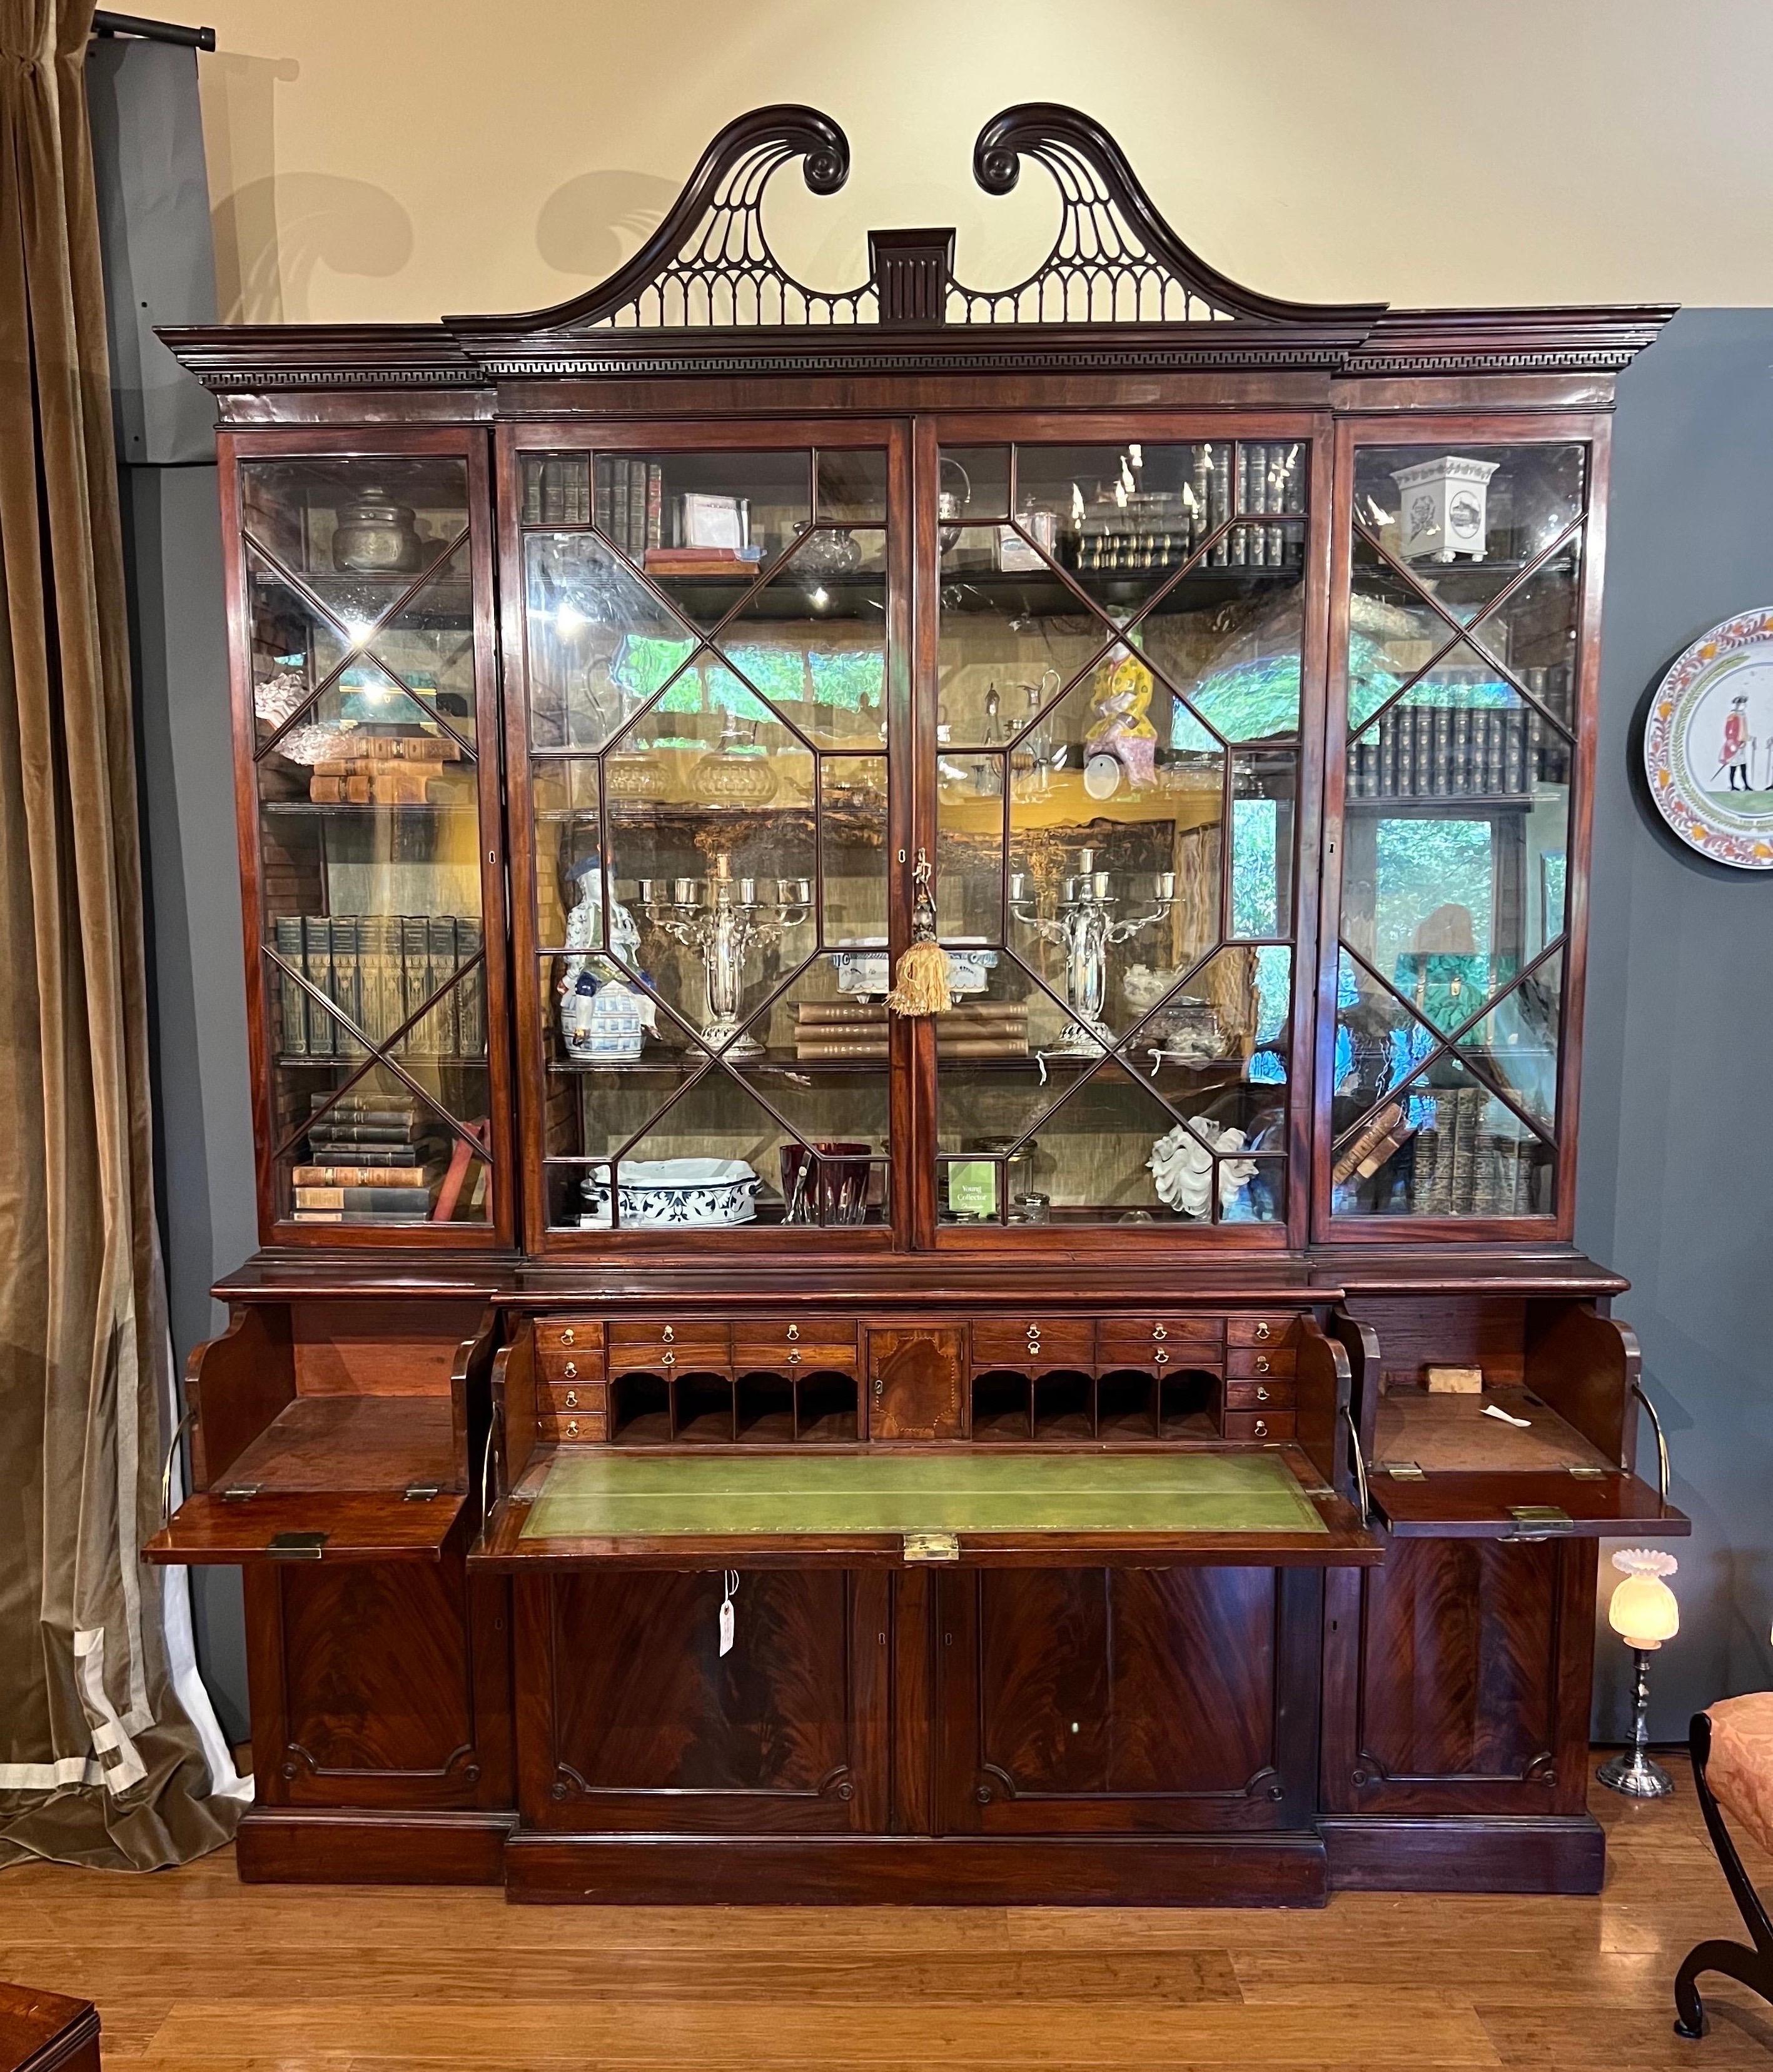 Superb 18th century Georgian Mahogany Breakfront Secretary Bookcase. This incredible secretary has highly figured mahogany, an intricate secretary desk with hidden compartment, beautifully carved swans neck pediment with dentil molding and original